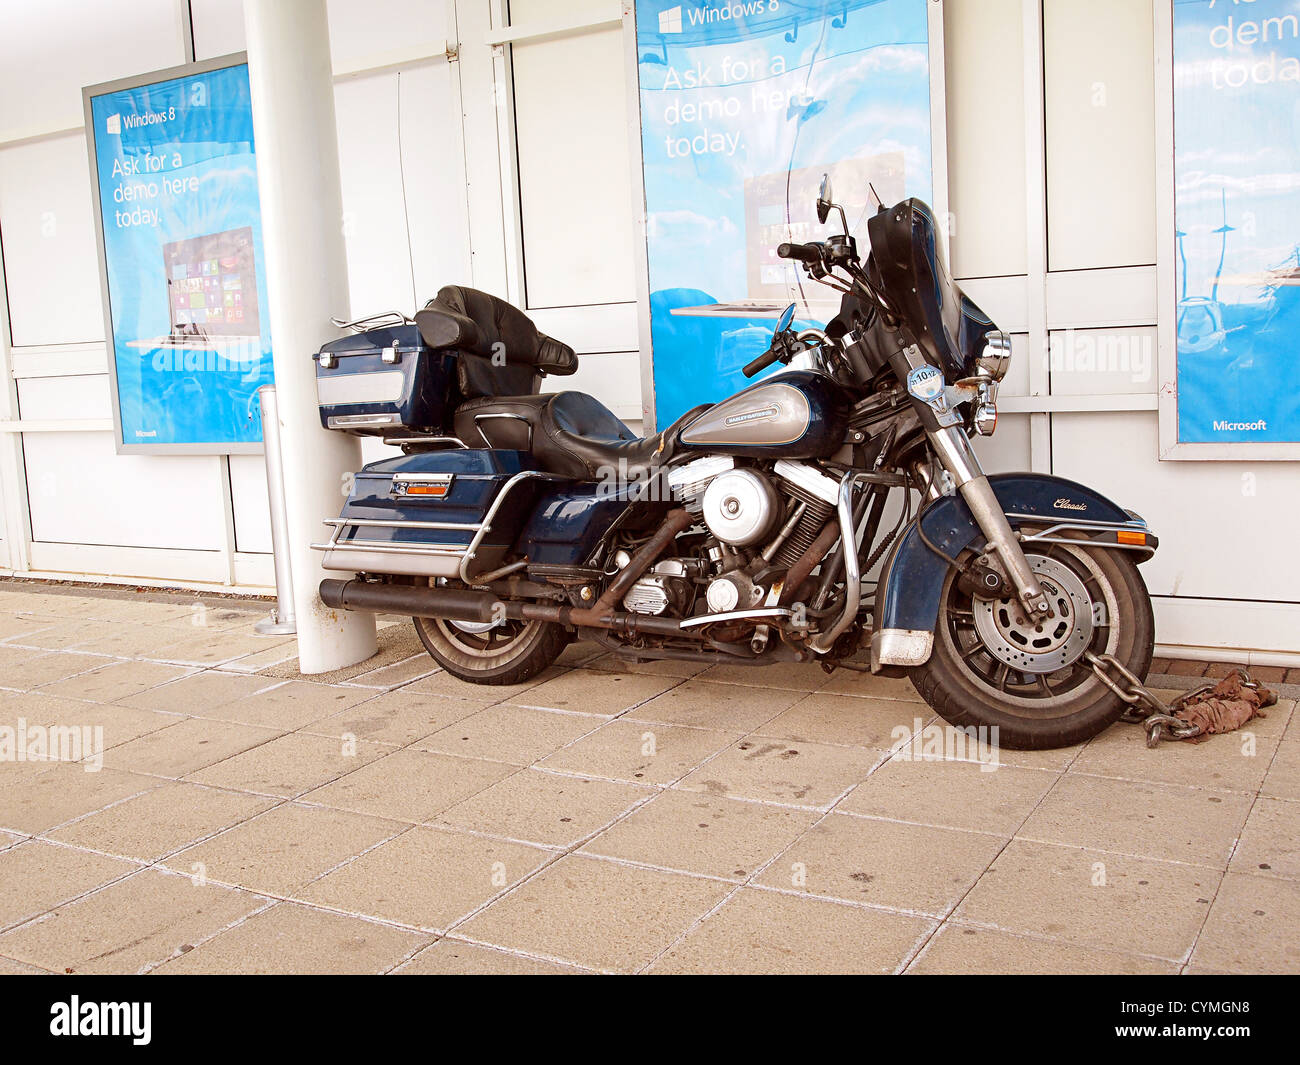 Well used Harley Davidson motor bike parked out side a retail store Stock Photo